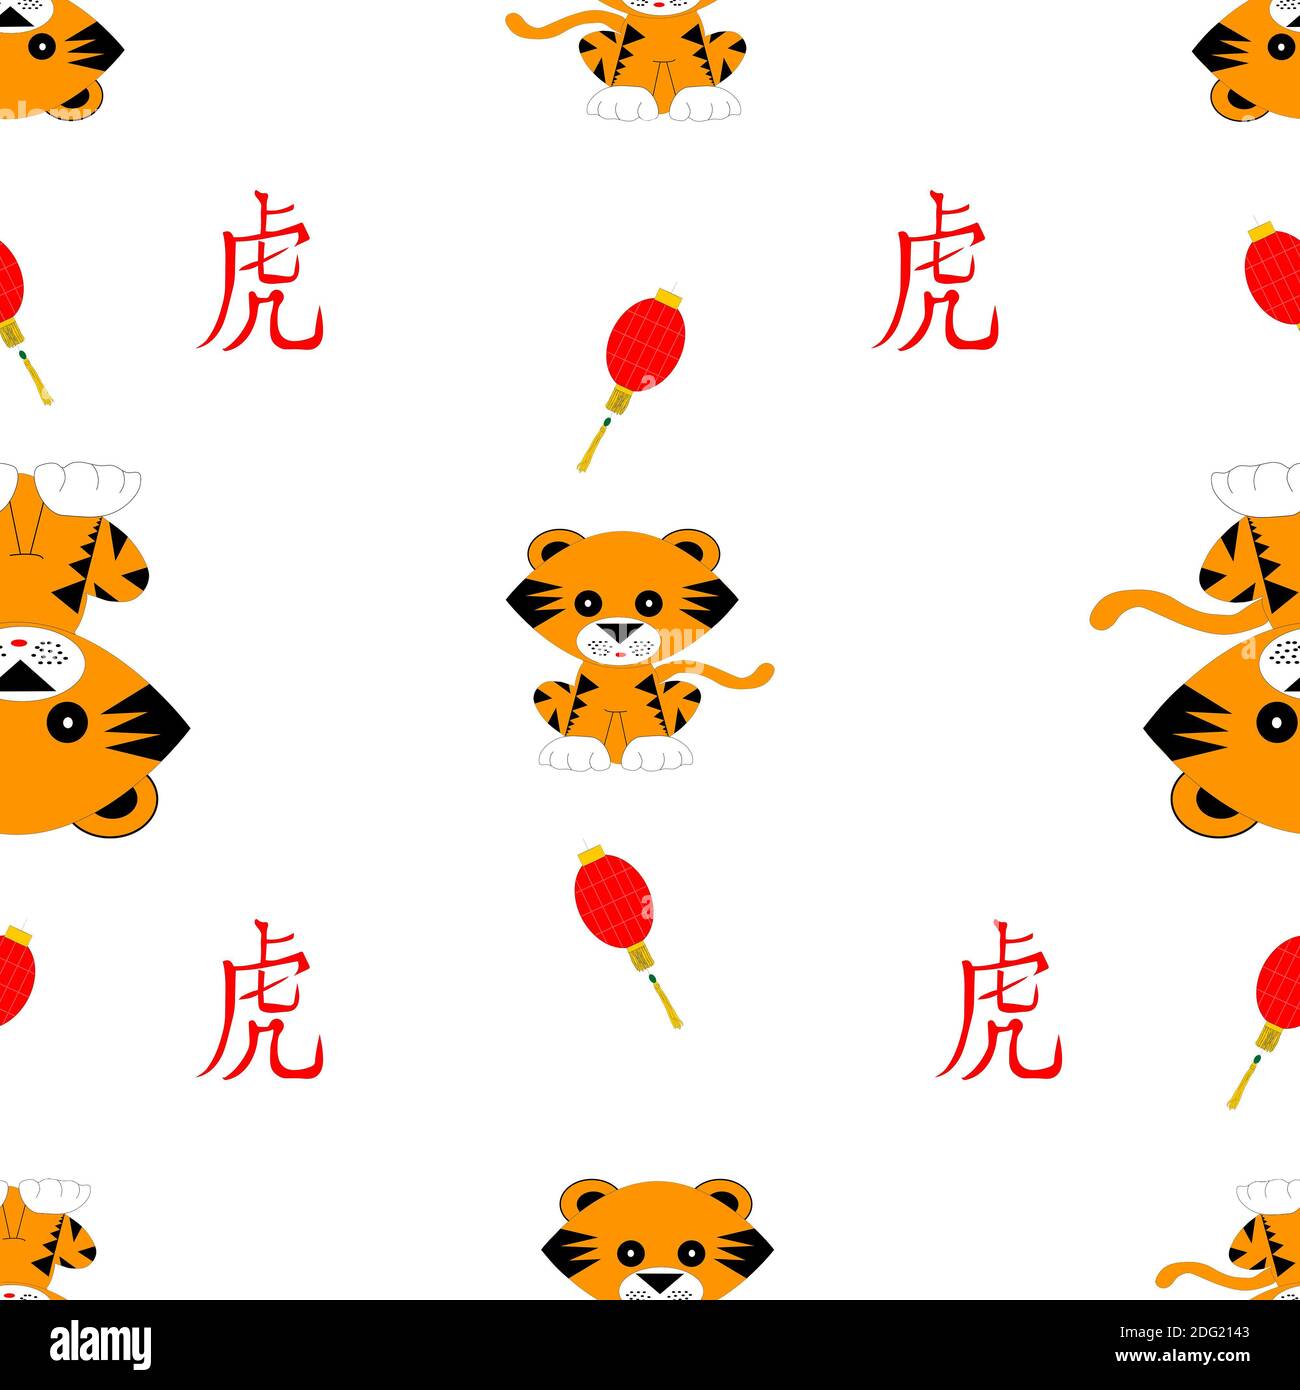 Seamless pattern of cartoon tiger, chinese character for tiger and red lanterns on white. Stock Photo